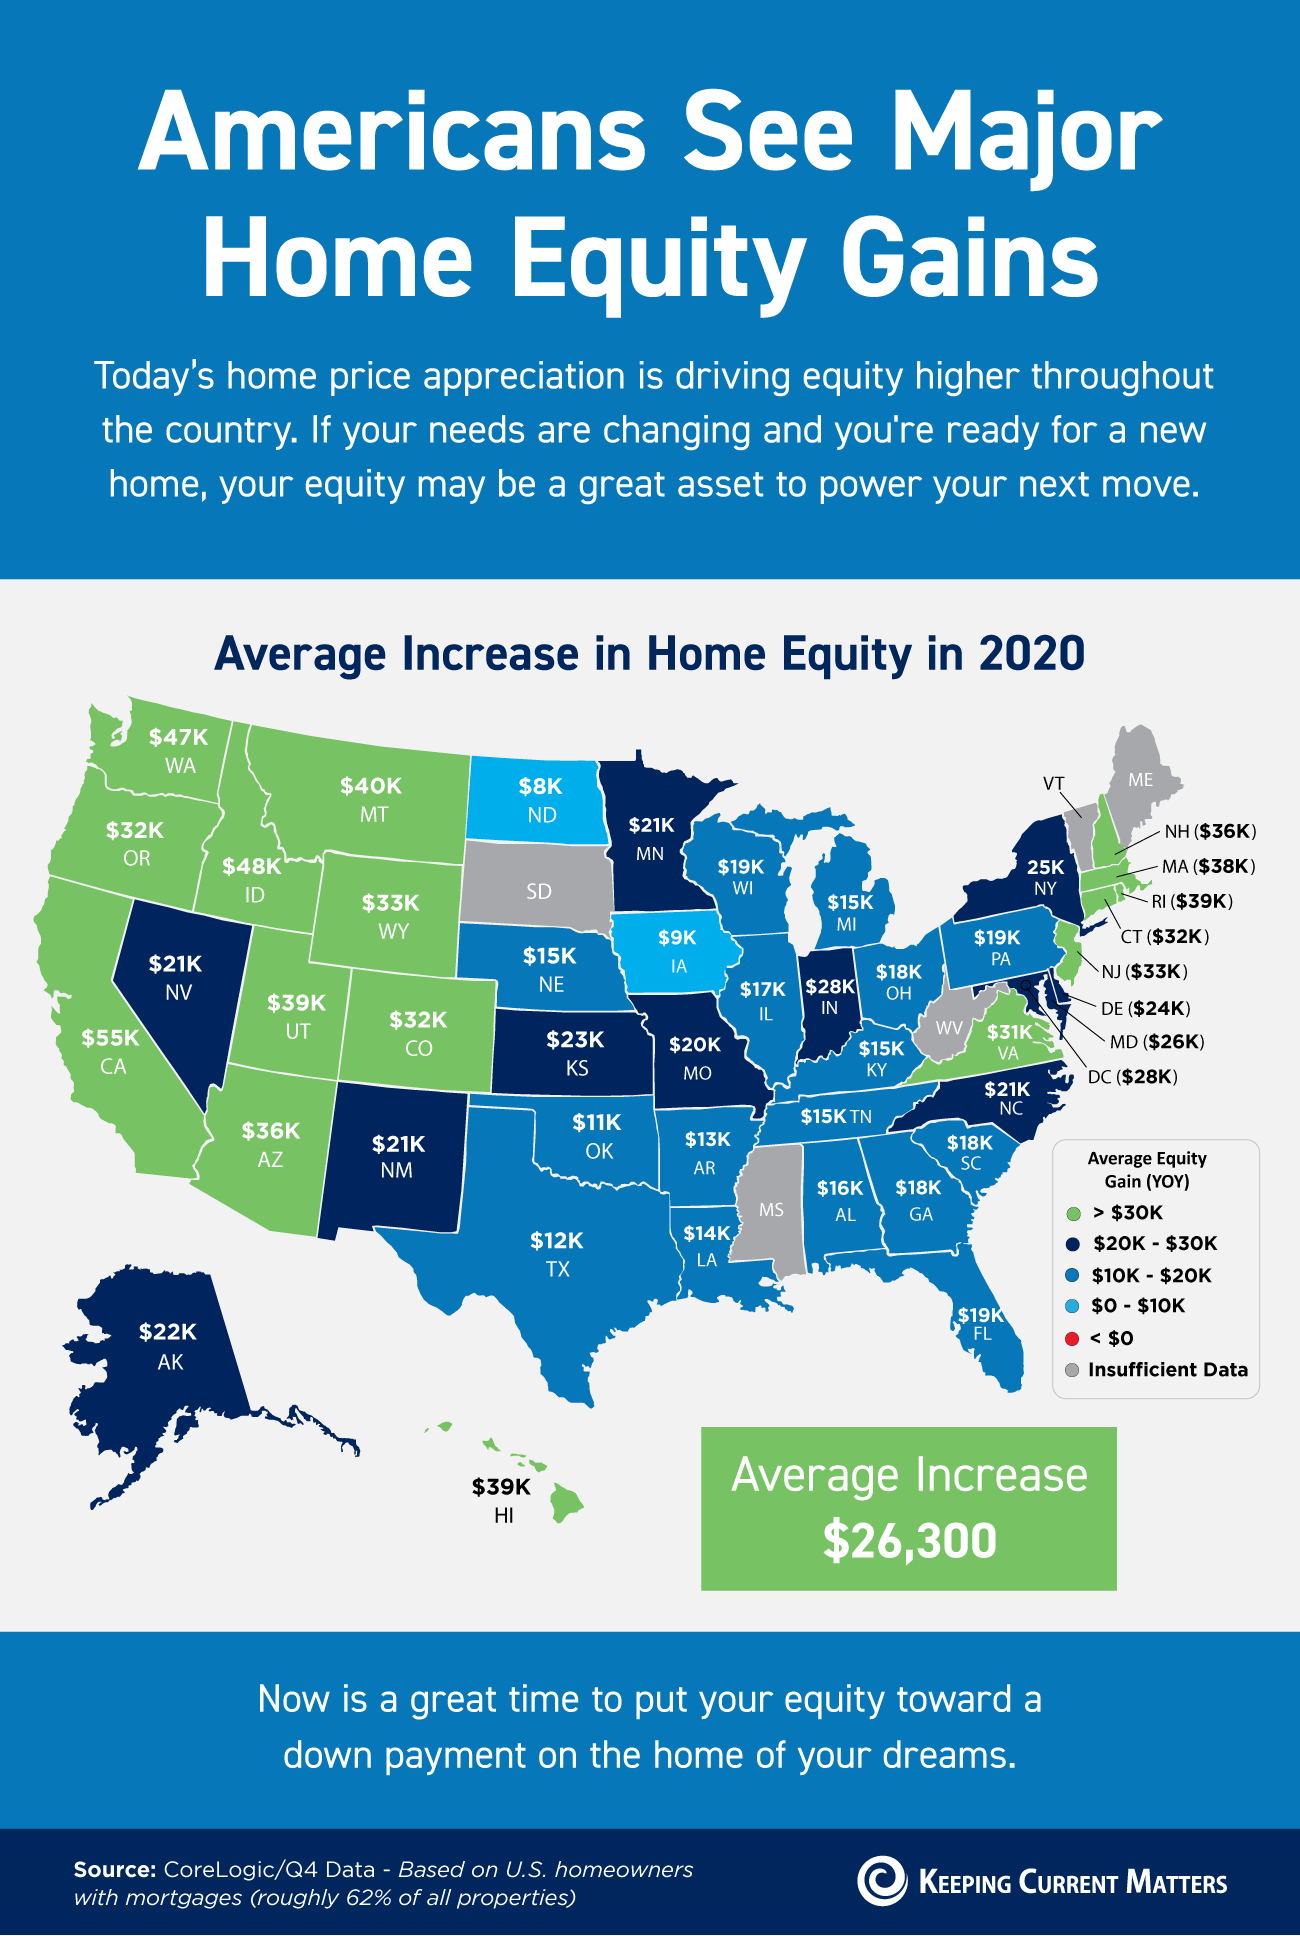 Americans See Major Home Equity Gains [INFOGRAPHIC] | Keeping Current Matters